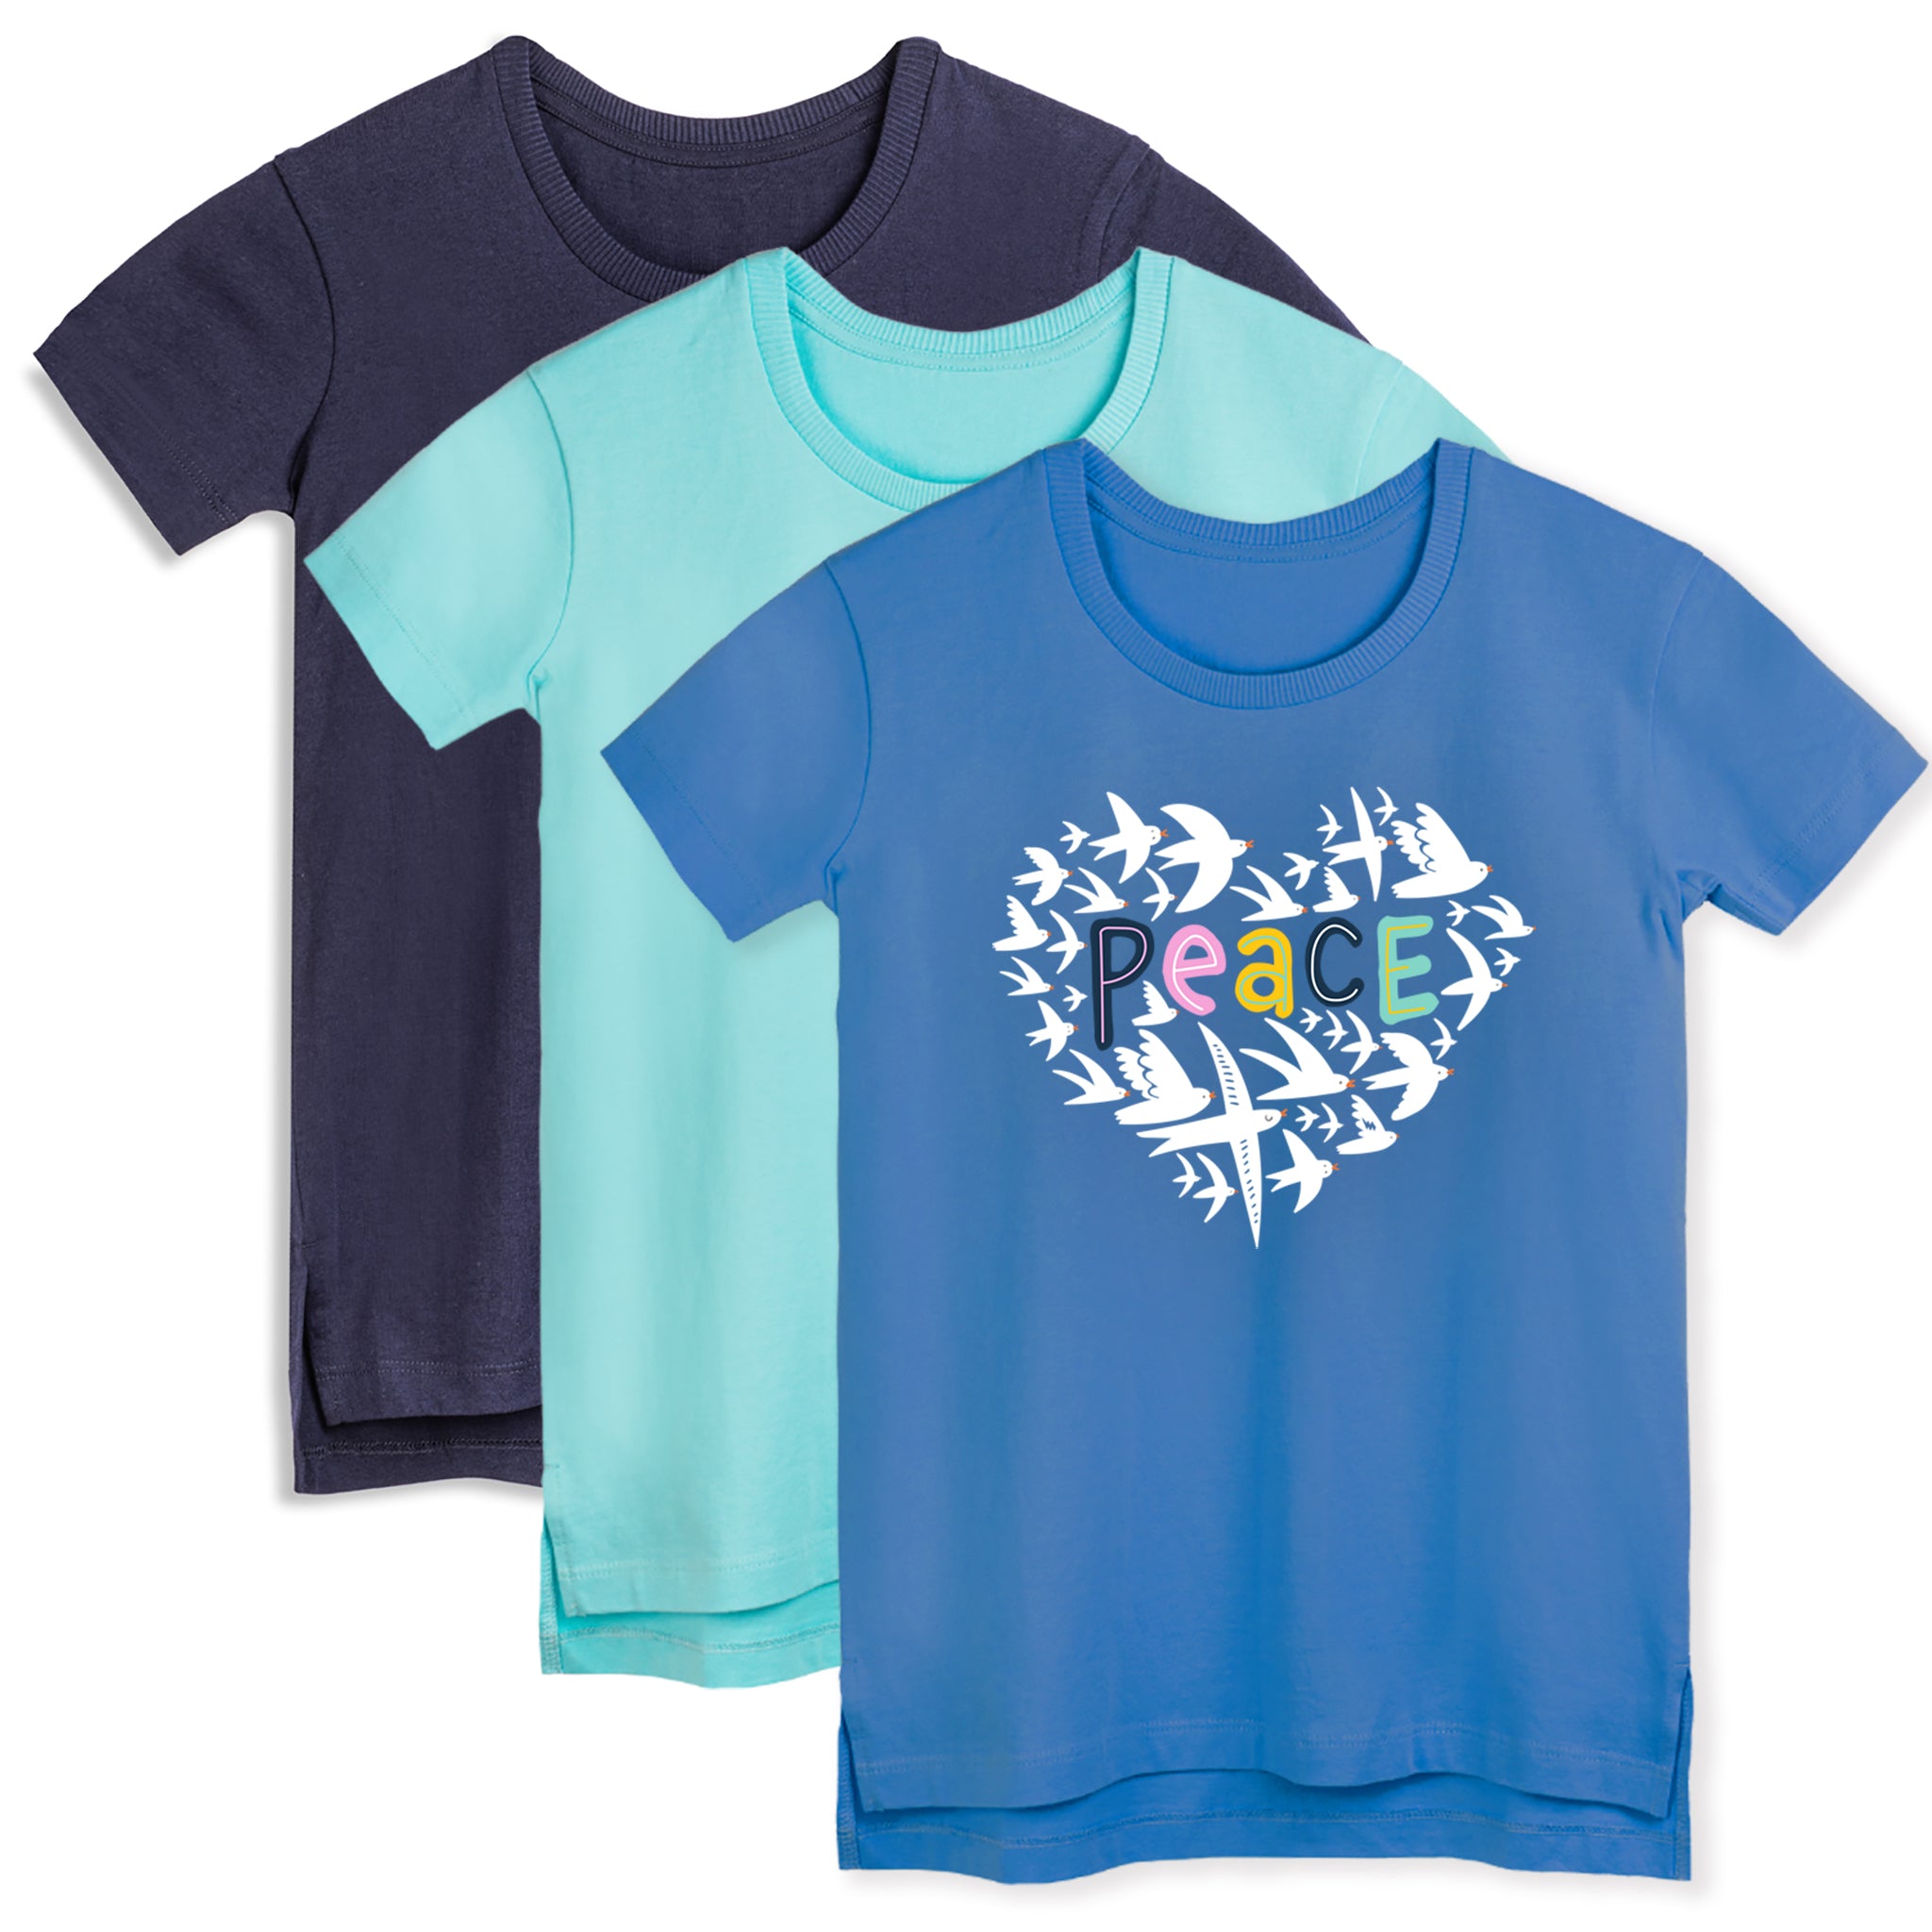 Organic Cotton Kids Shirts - Extended Length T-Shirts 3 Pack - Mightly